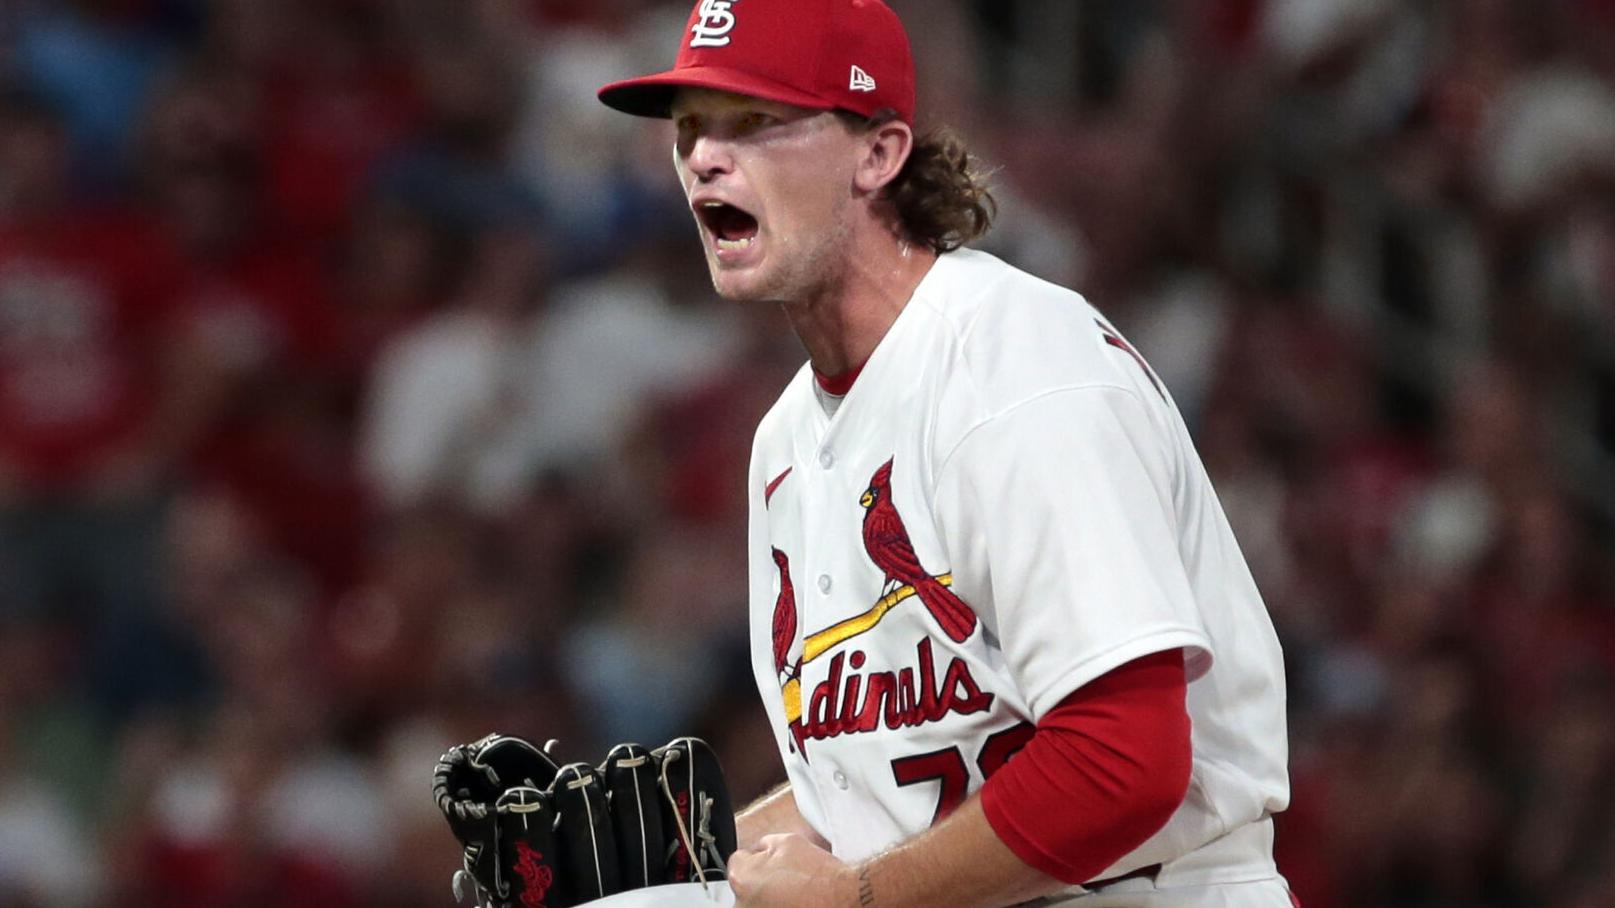 How plucky Packy Naughton dodged LA magic, conjured outs in Cardinals' breathtaking win